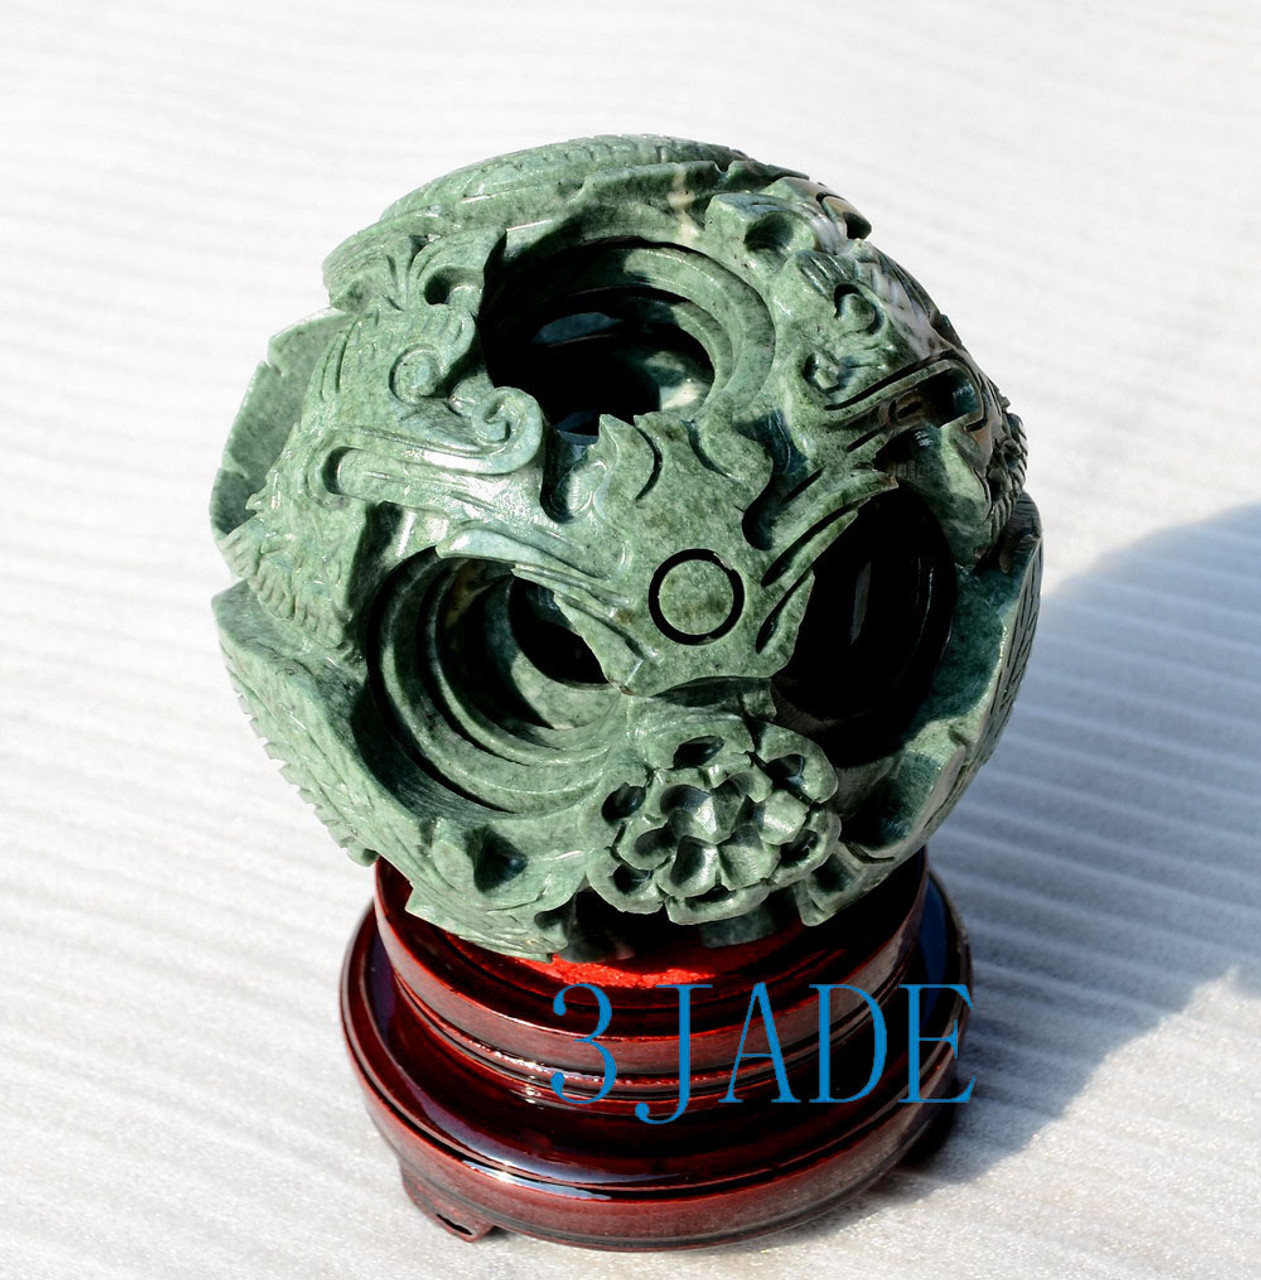 6 1/4" Hand Carved 8 layers Green Jade/Stone Magic Puzzle Ball Sphere